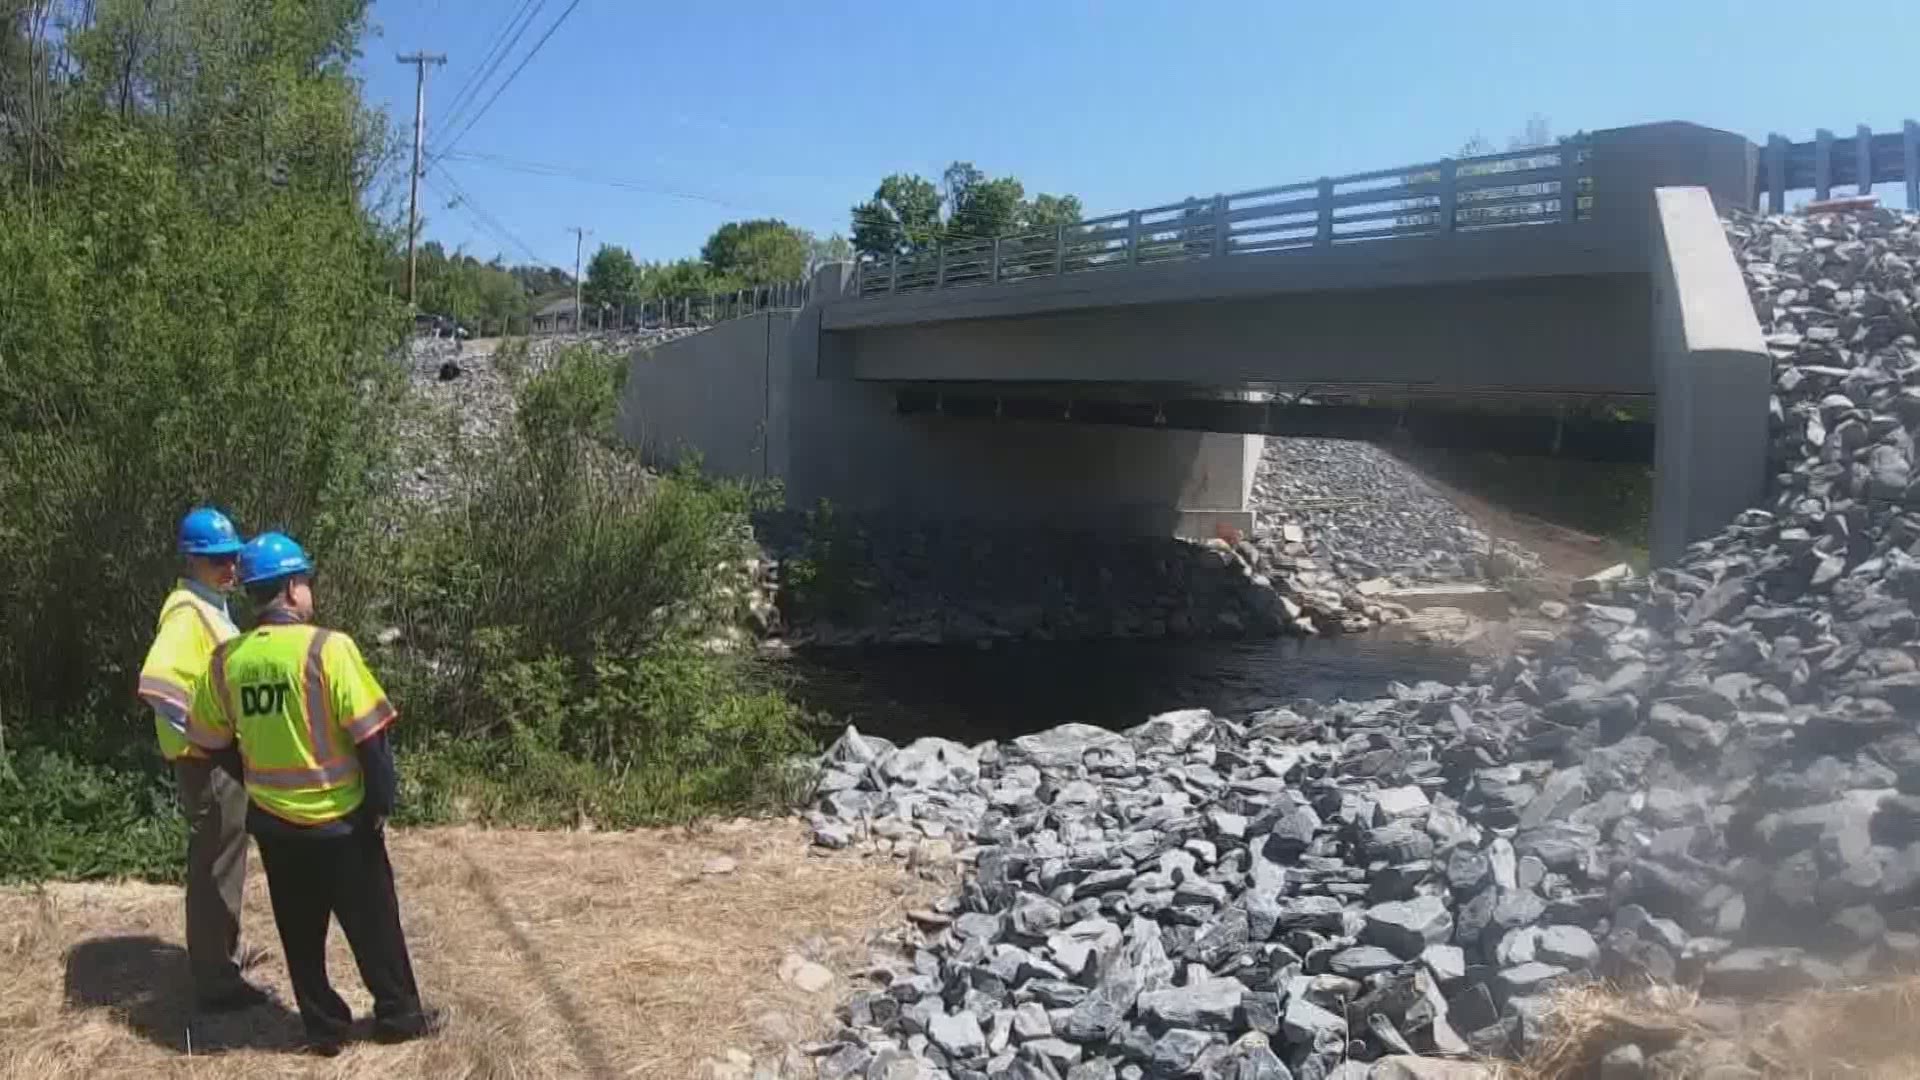 The Grist Mill Bridge in Hampden is the first bridge in the United States to utilize a new composite technology that allows for longer life and lower costs.